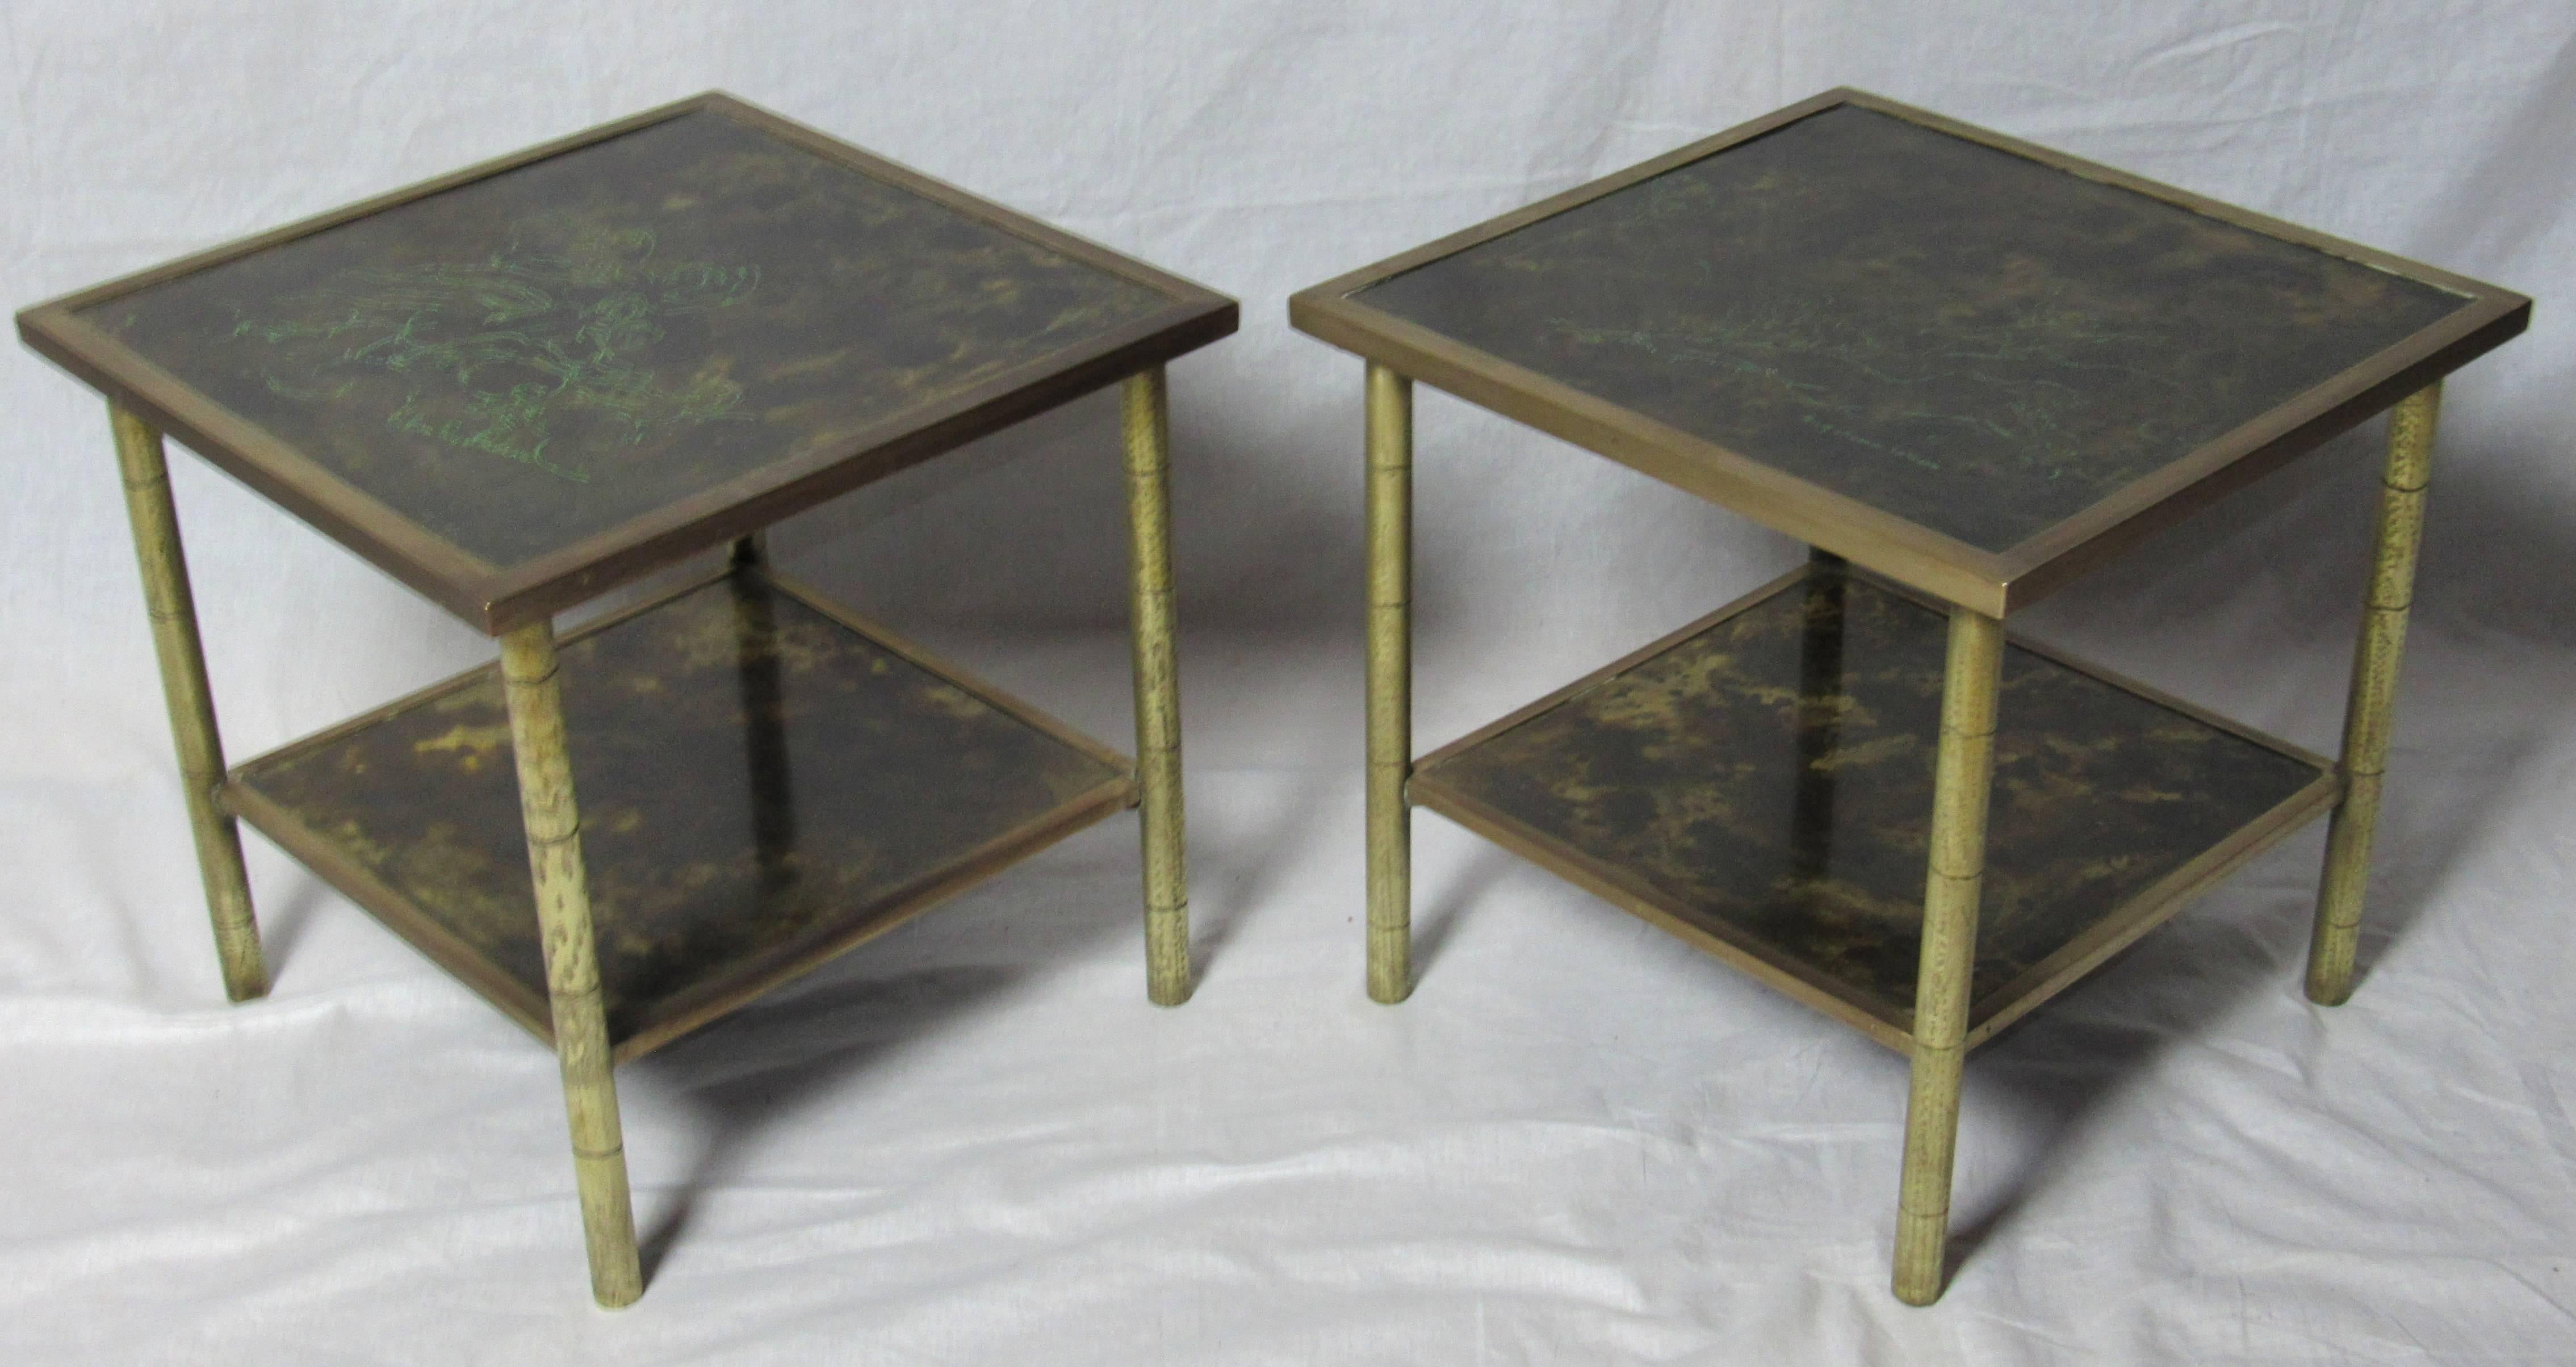 A pair of etched brass side tables by Kelvin & Philip LaVerne. The classical etchings of nude women are from the 